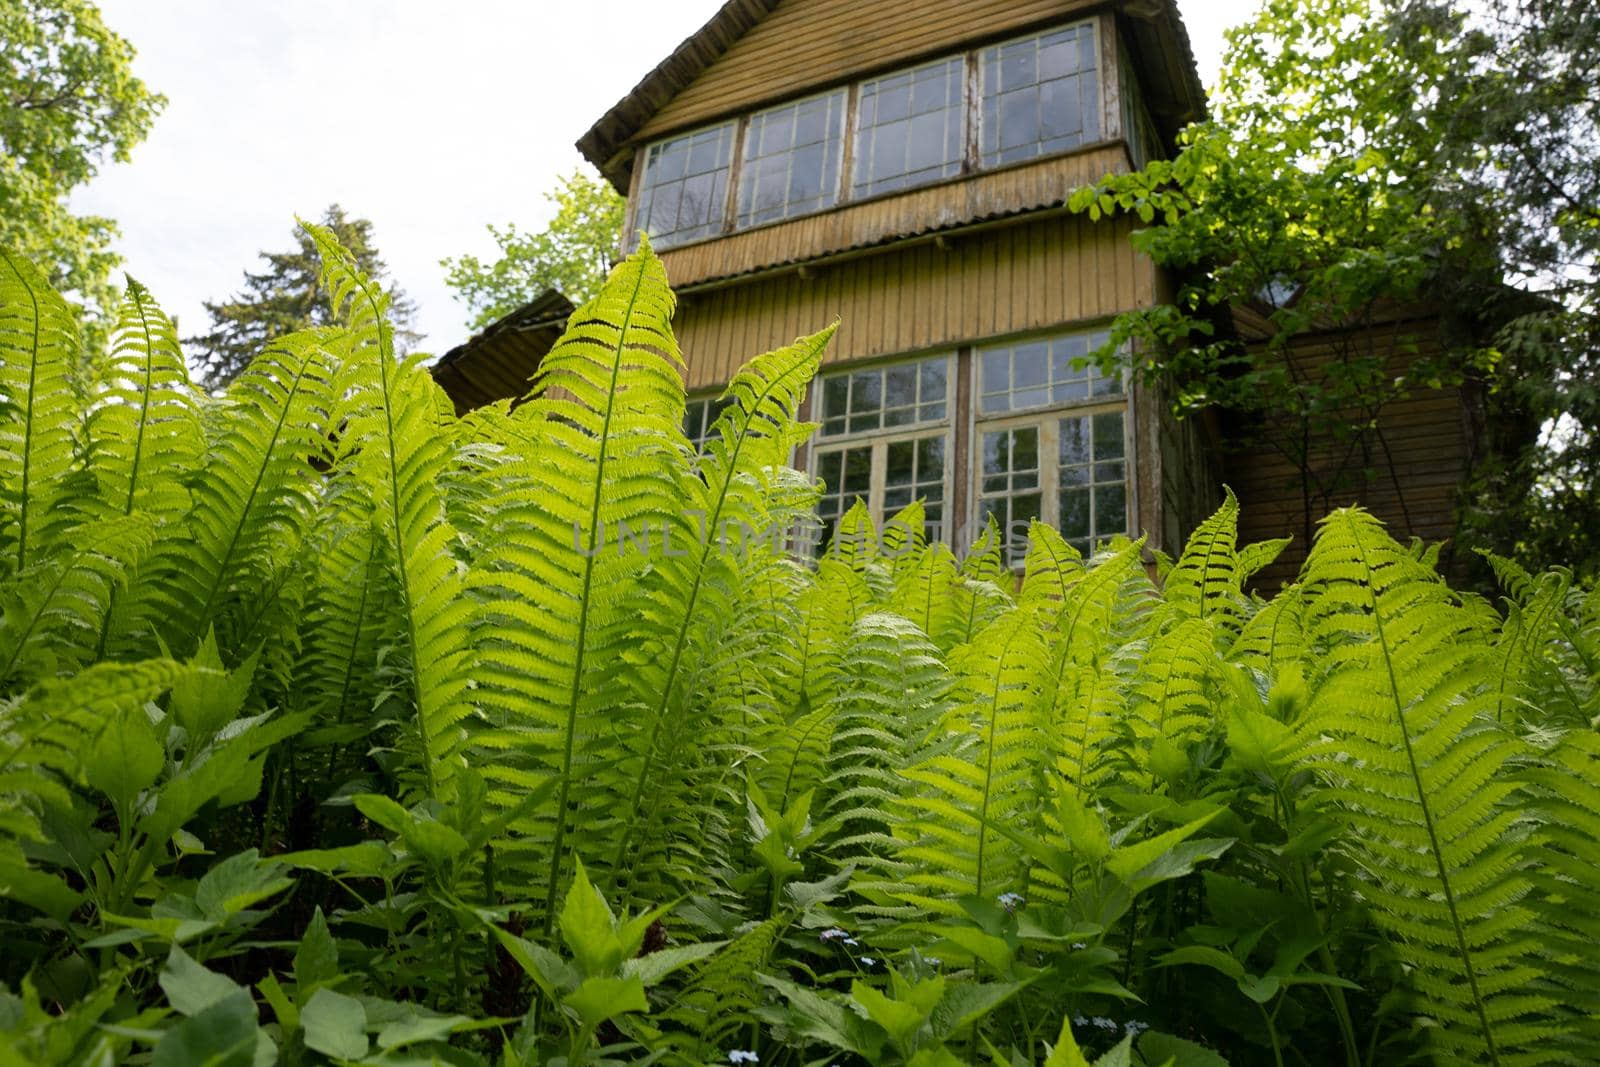 View of an old wooden house with big glass windows through fern bushes